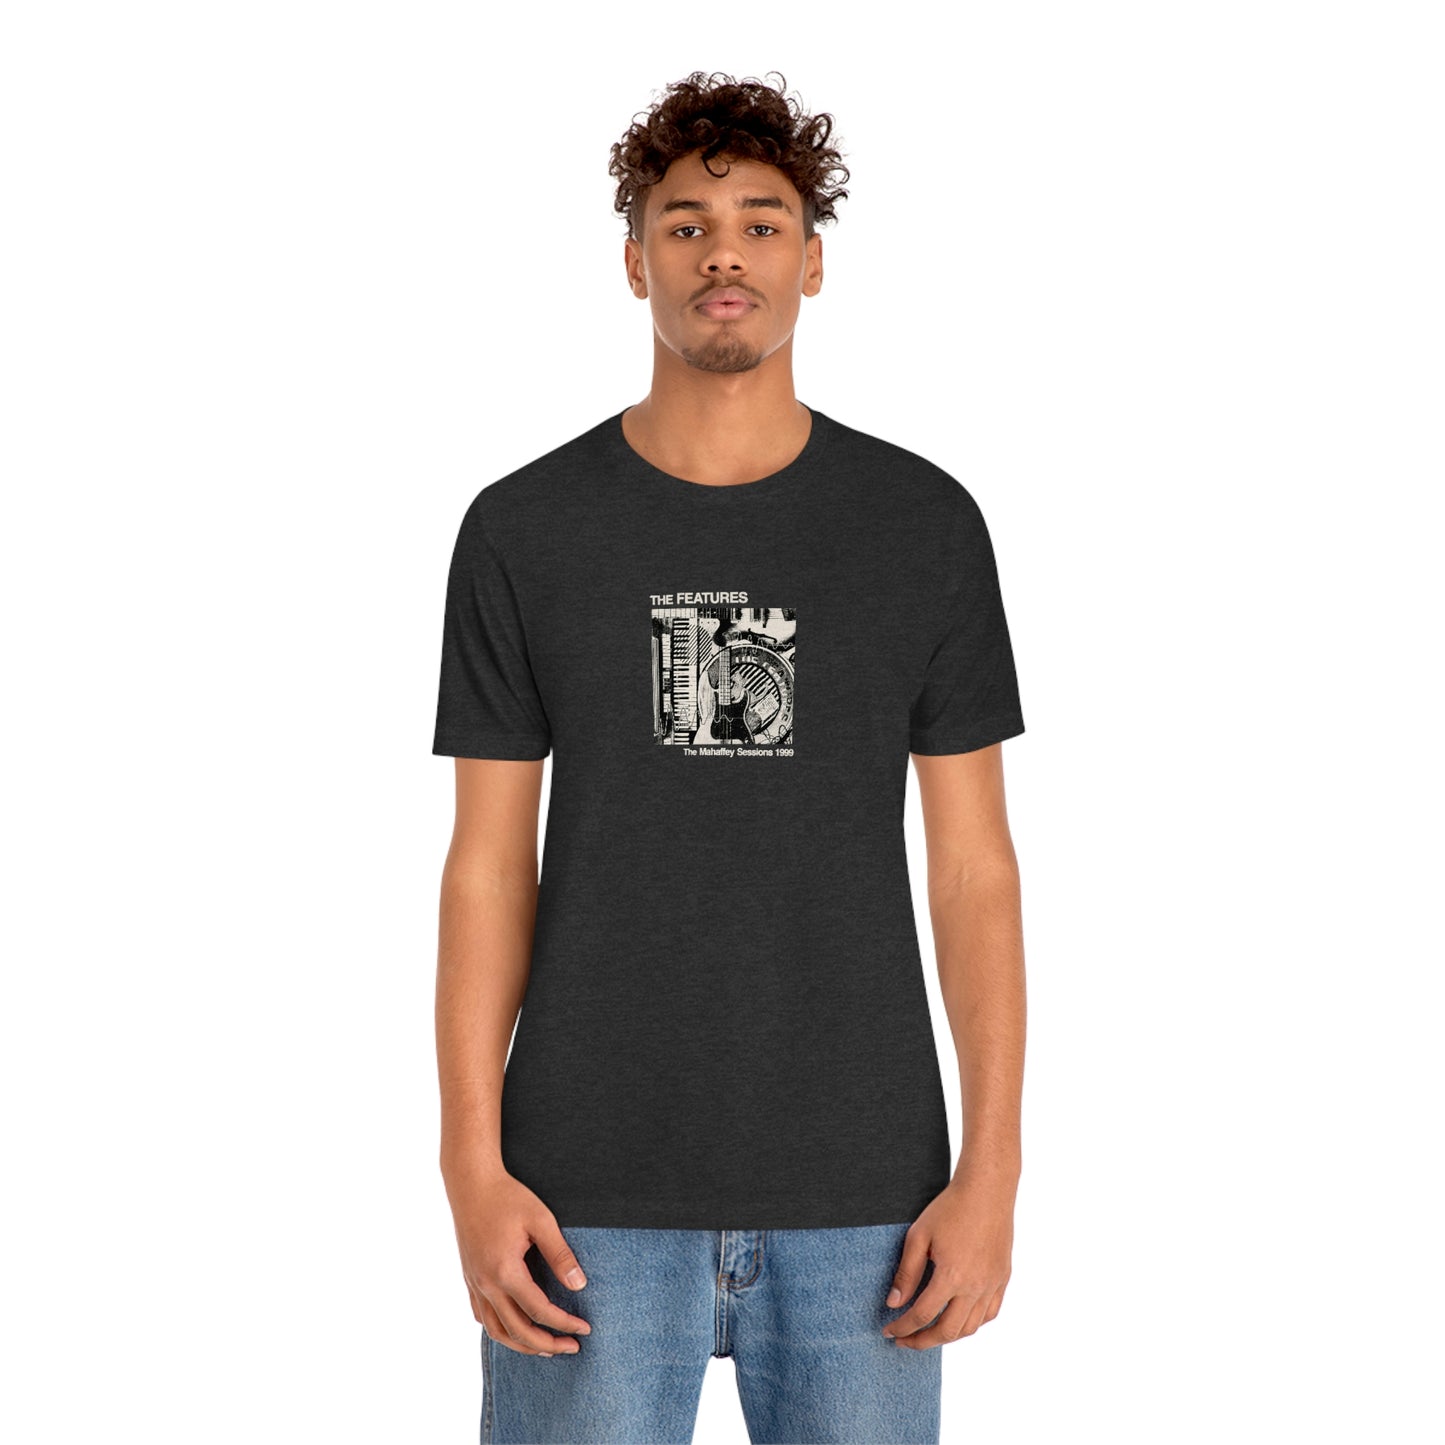 The Features: Mahaffey Sessions 1999 Tee